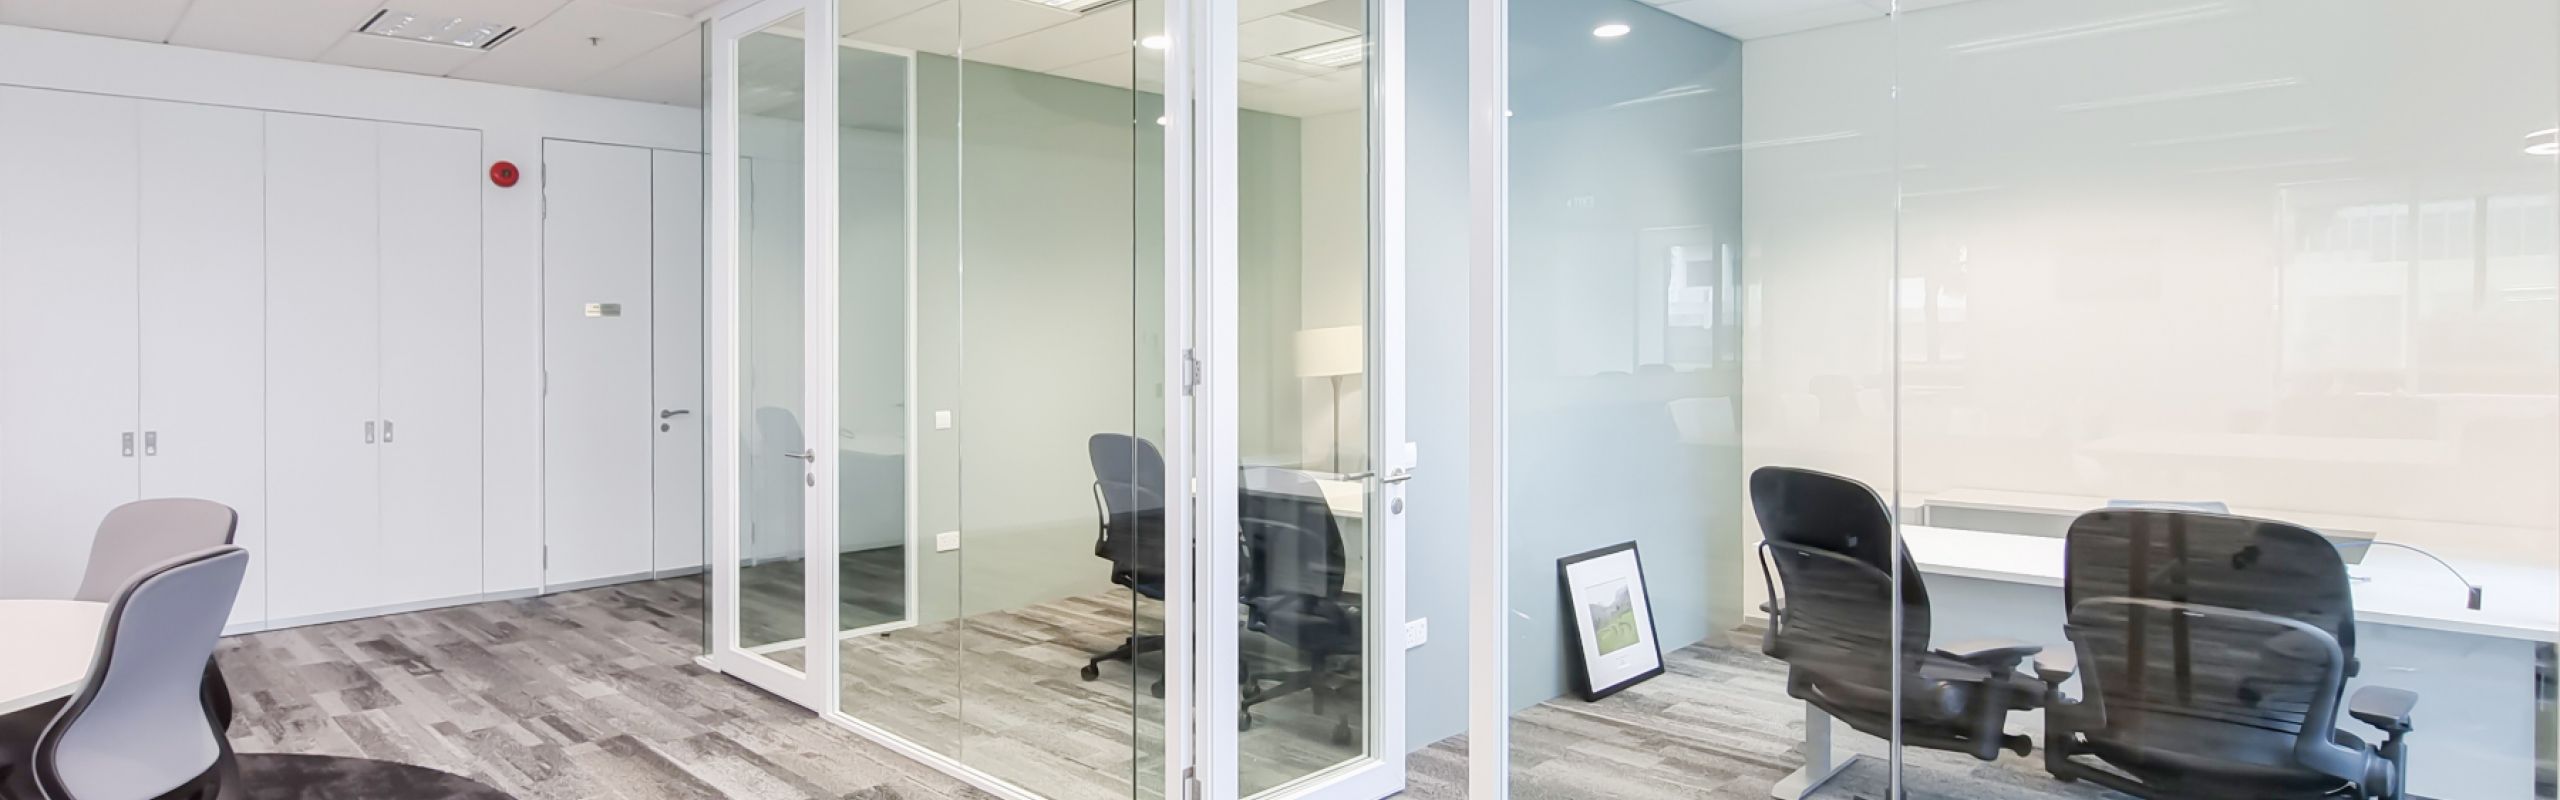 Soundproof Your Office with Acoustic Glass Partitioning